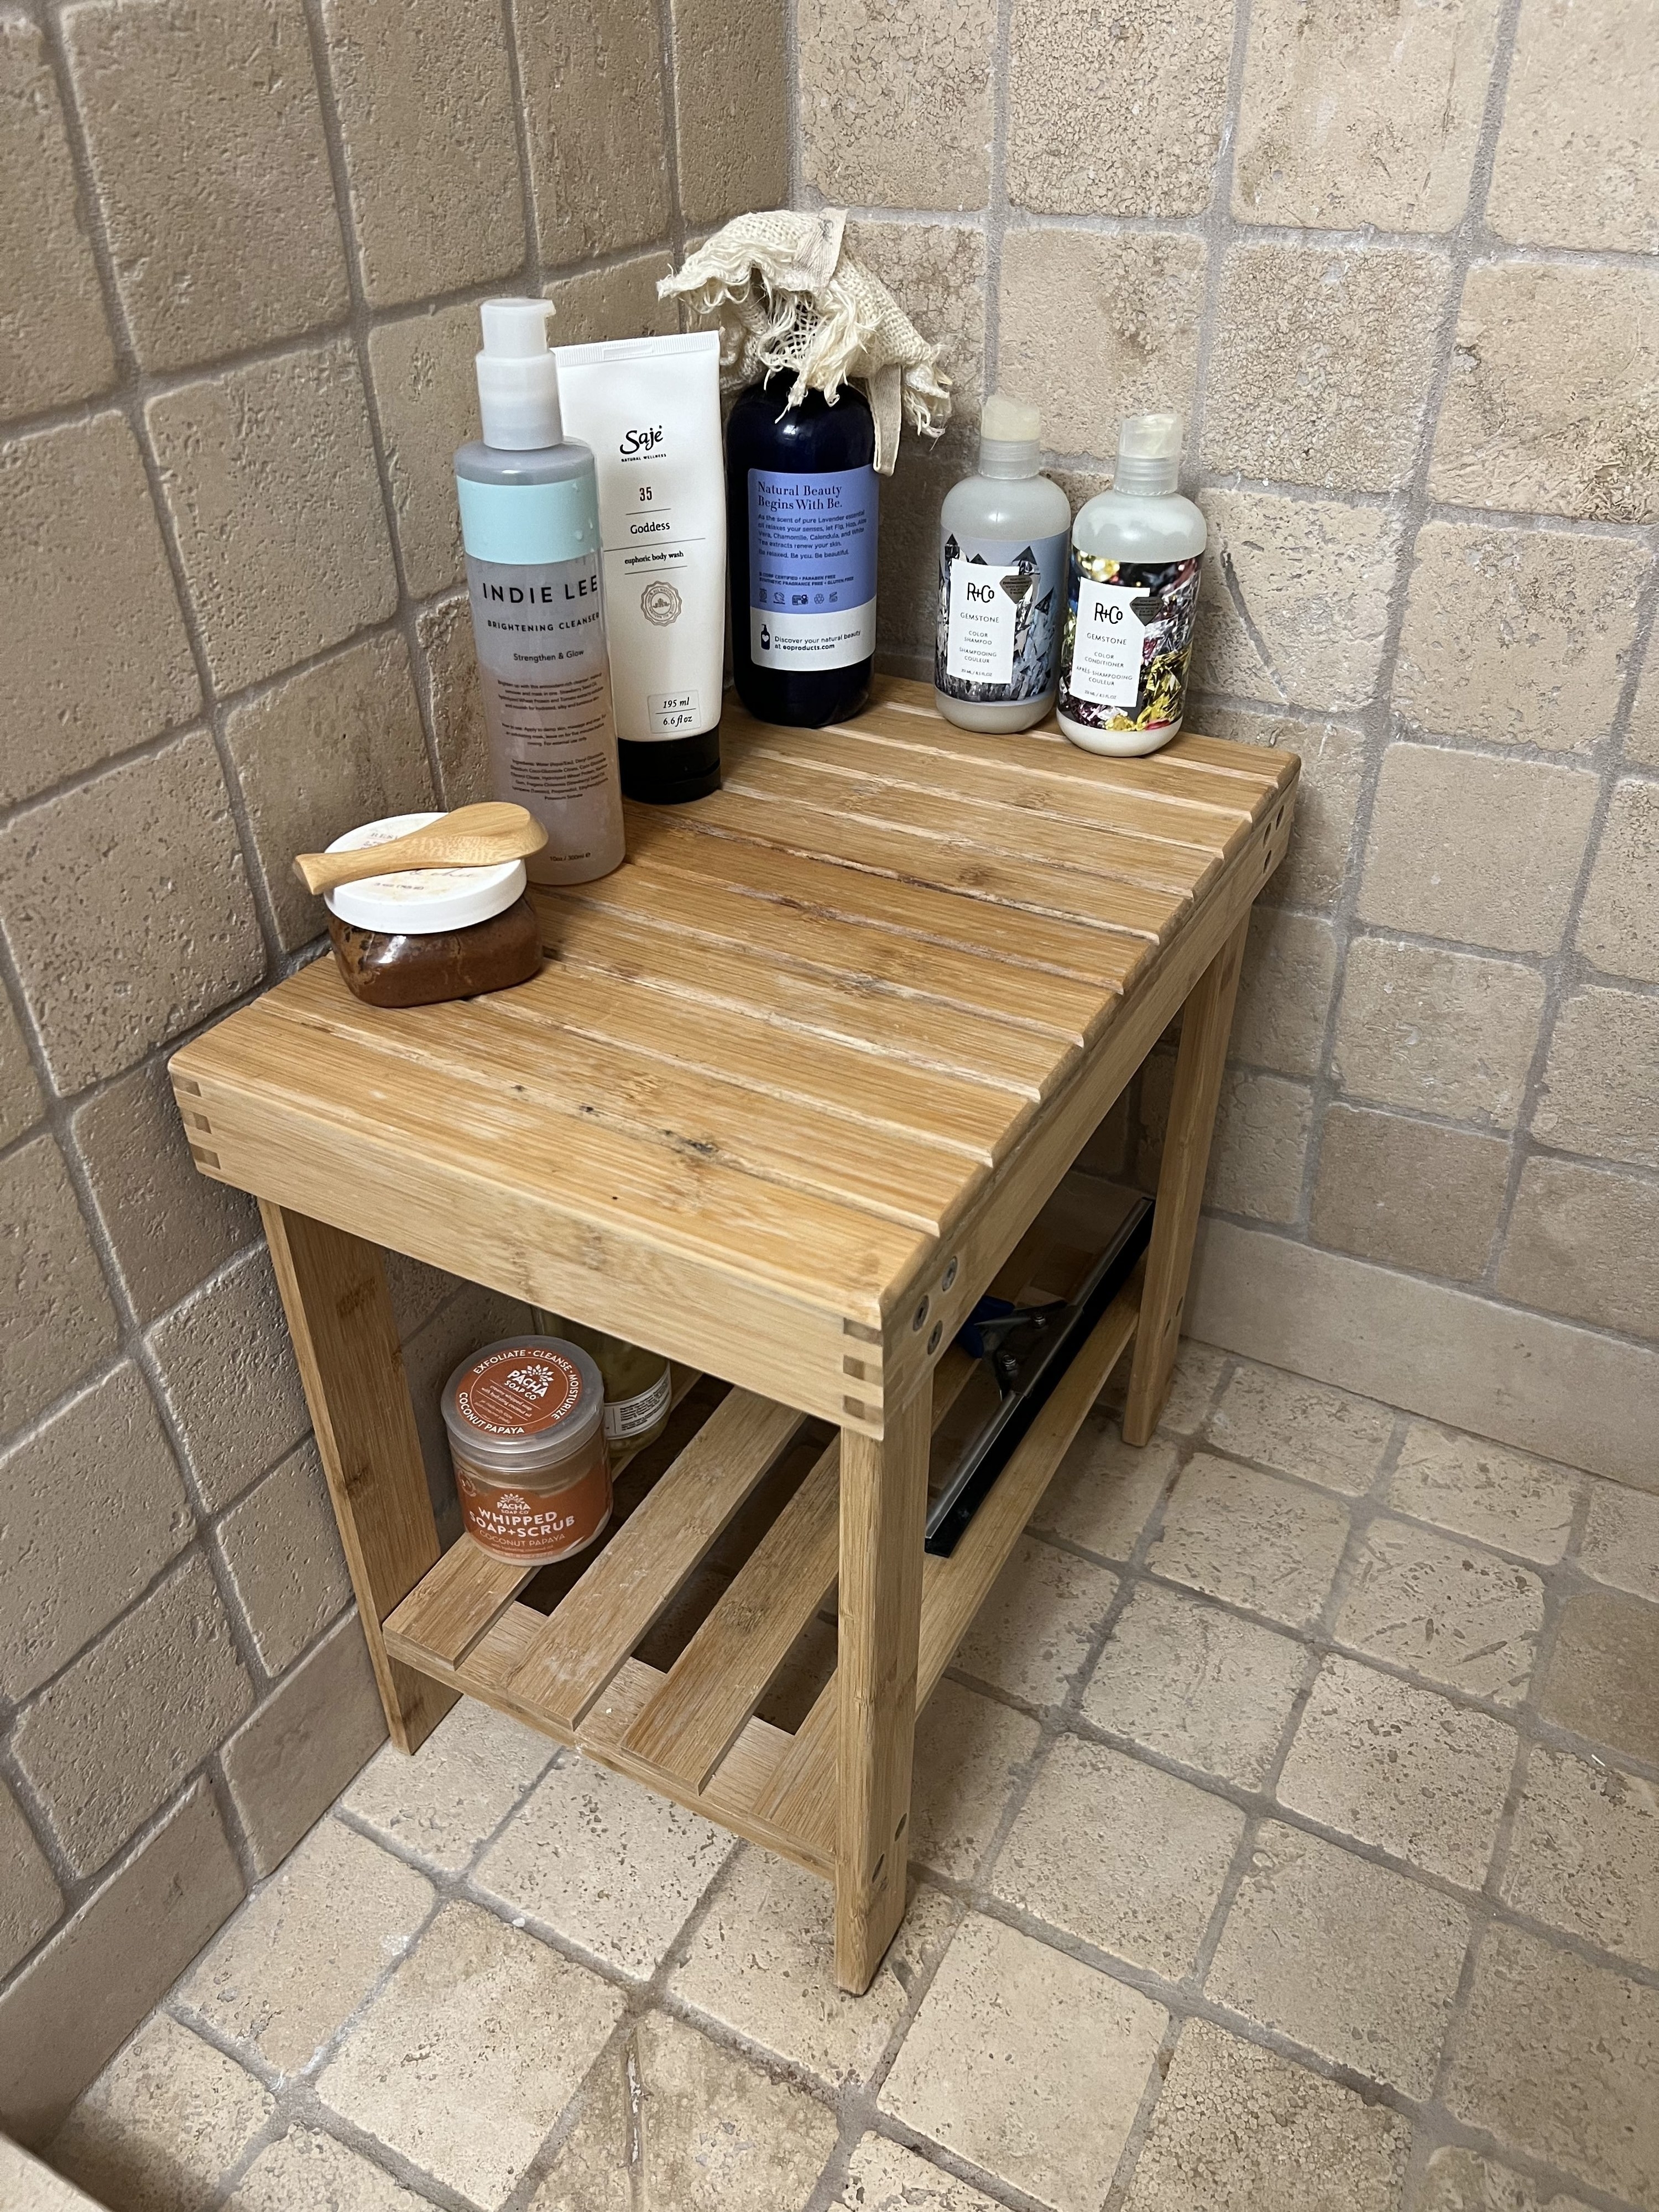 A bamboo shower stool is shown in a shower enclosure